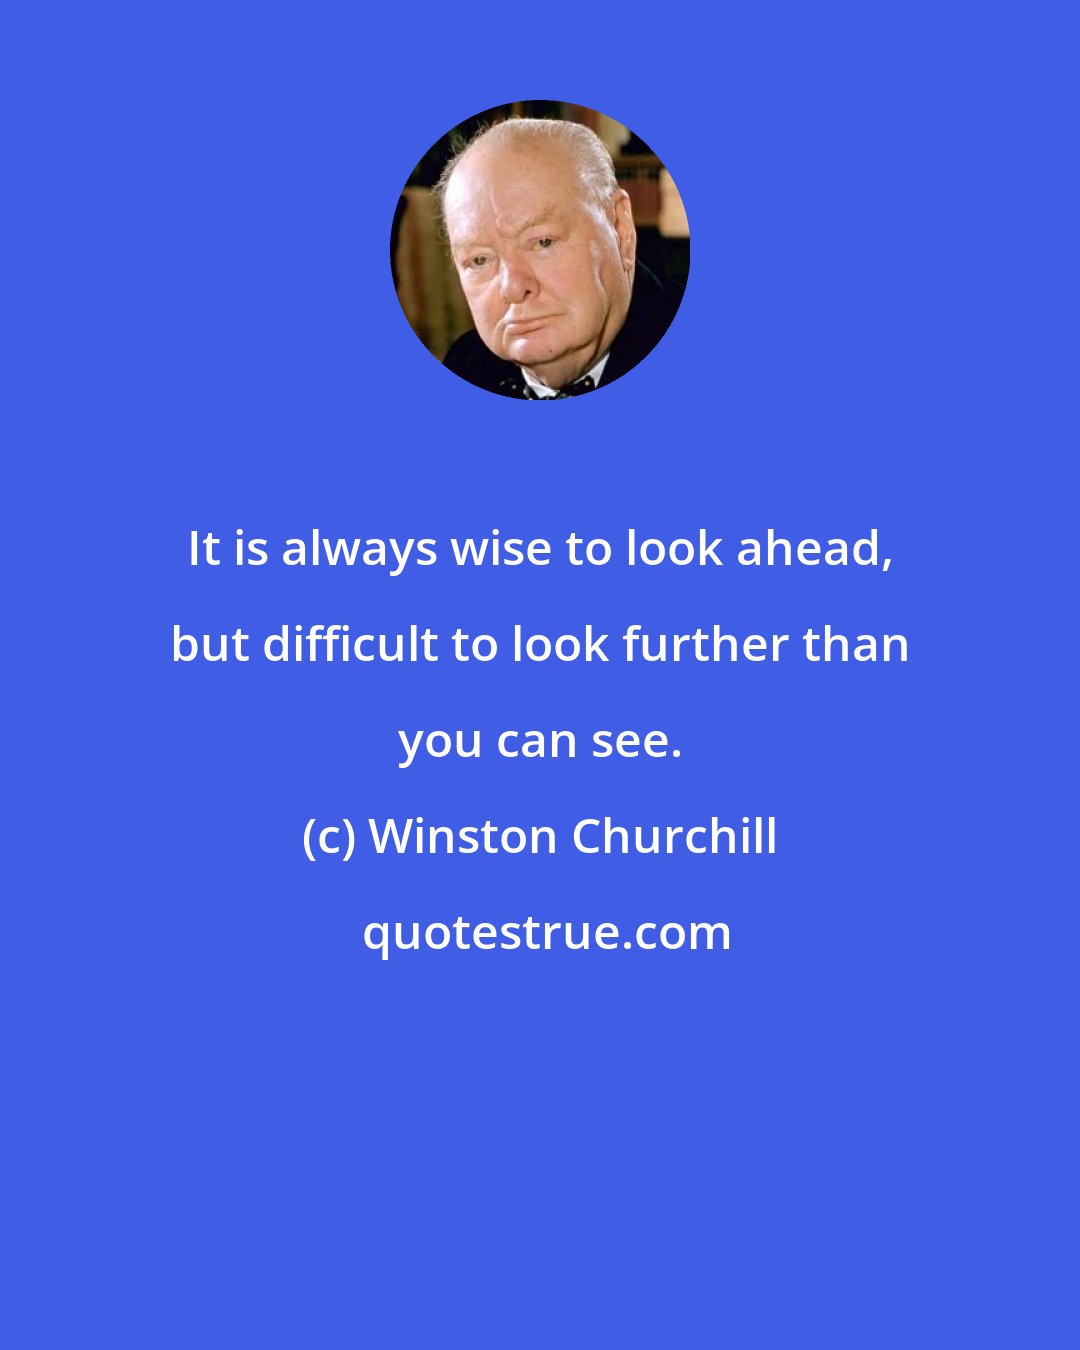 Winston Churchill: It is always wise to look ahead, but difficult to look further than you can see.